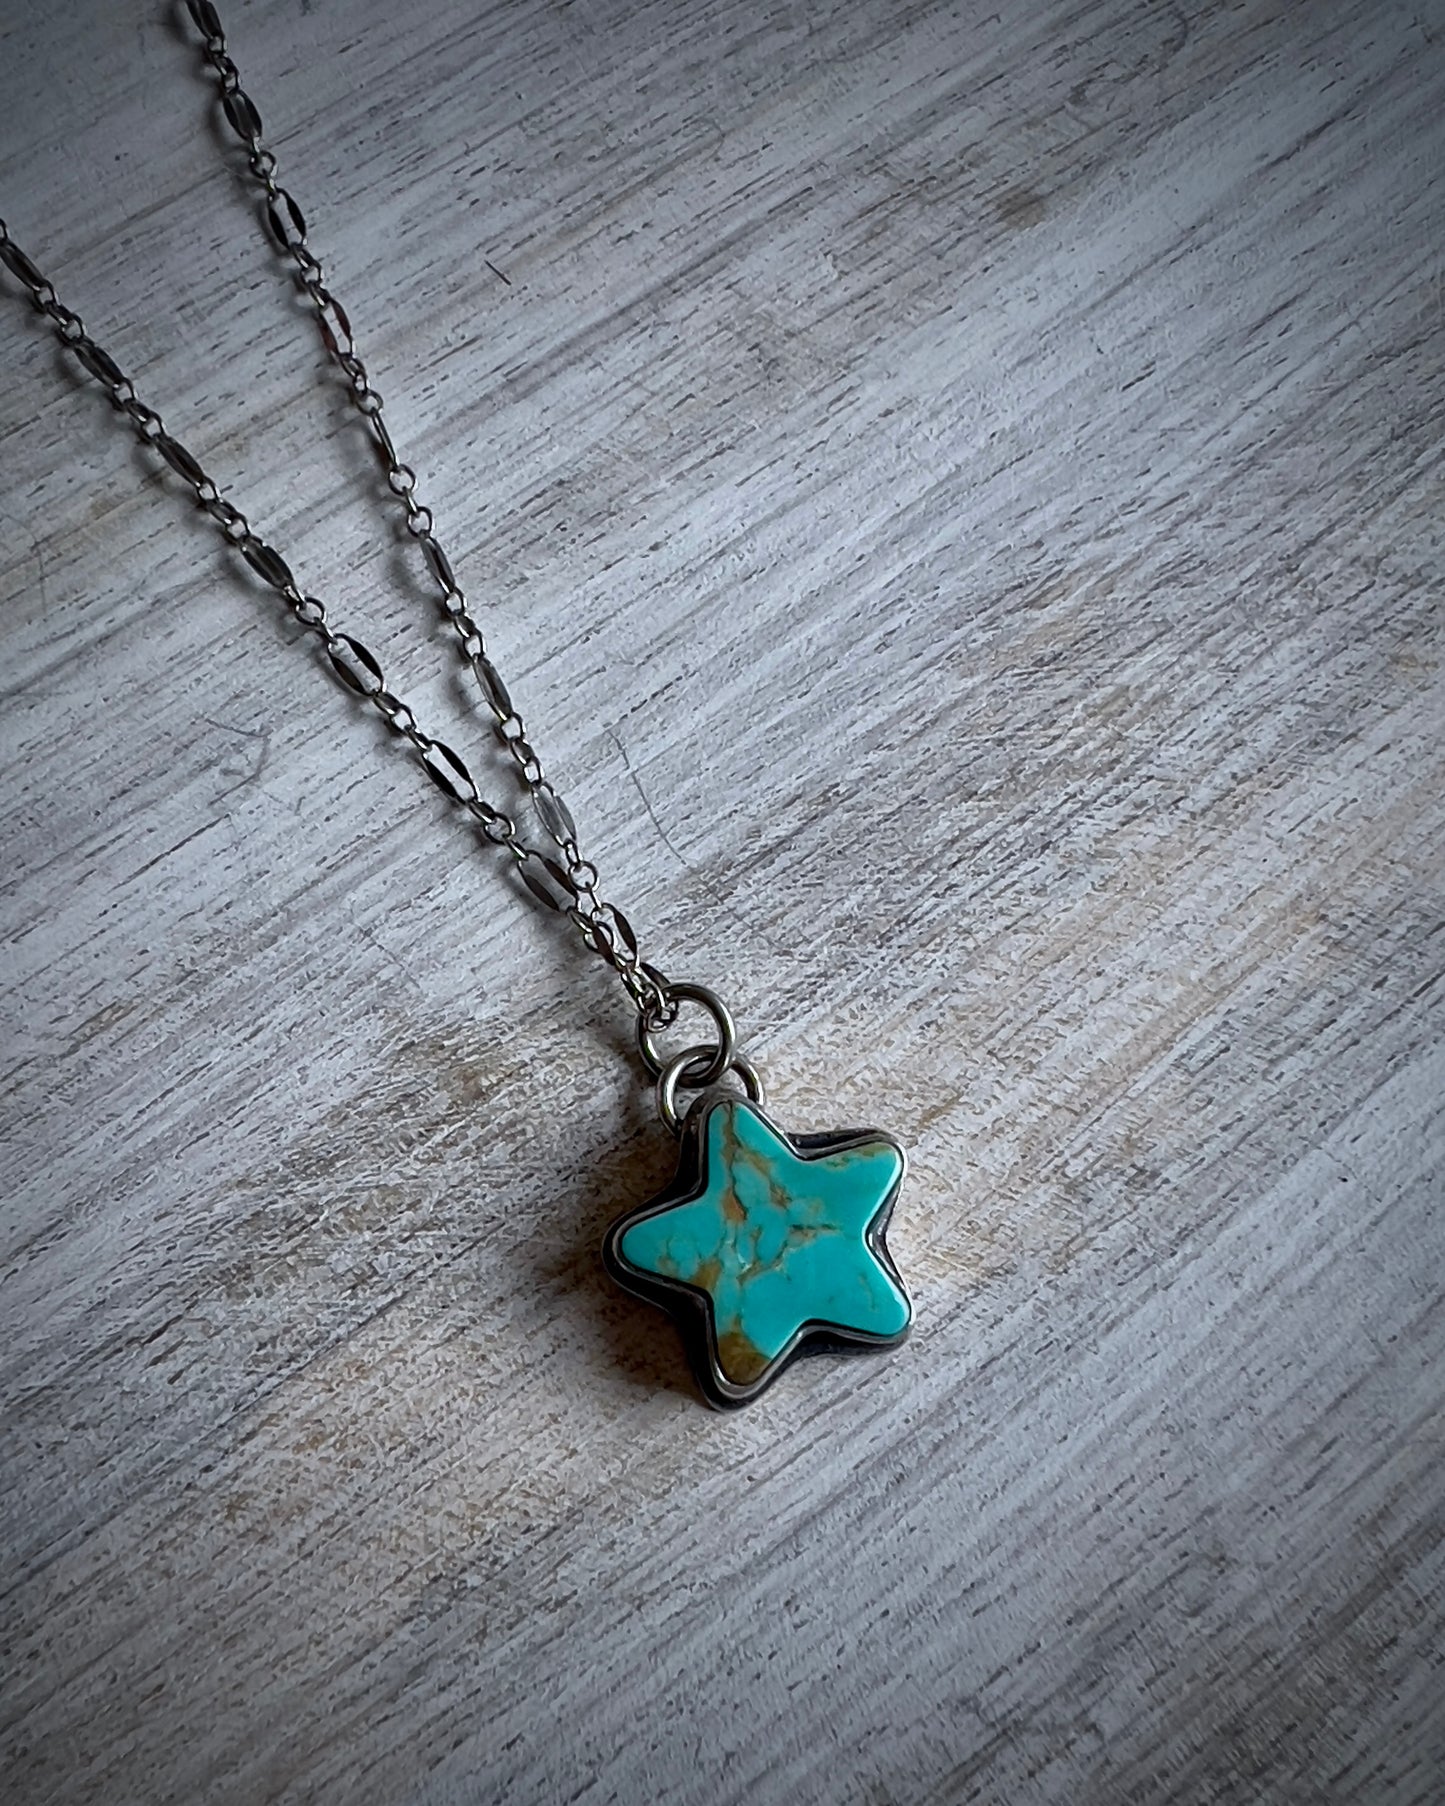 Chilean Turquoise Charm Necklace - 18" Chain